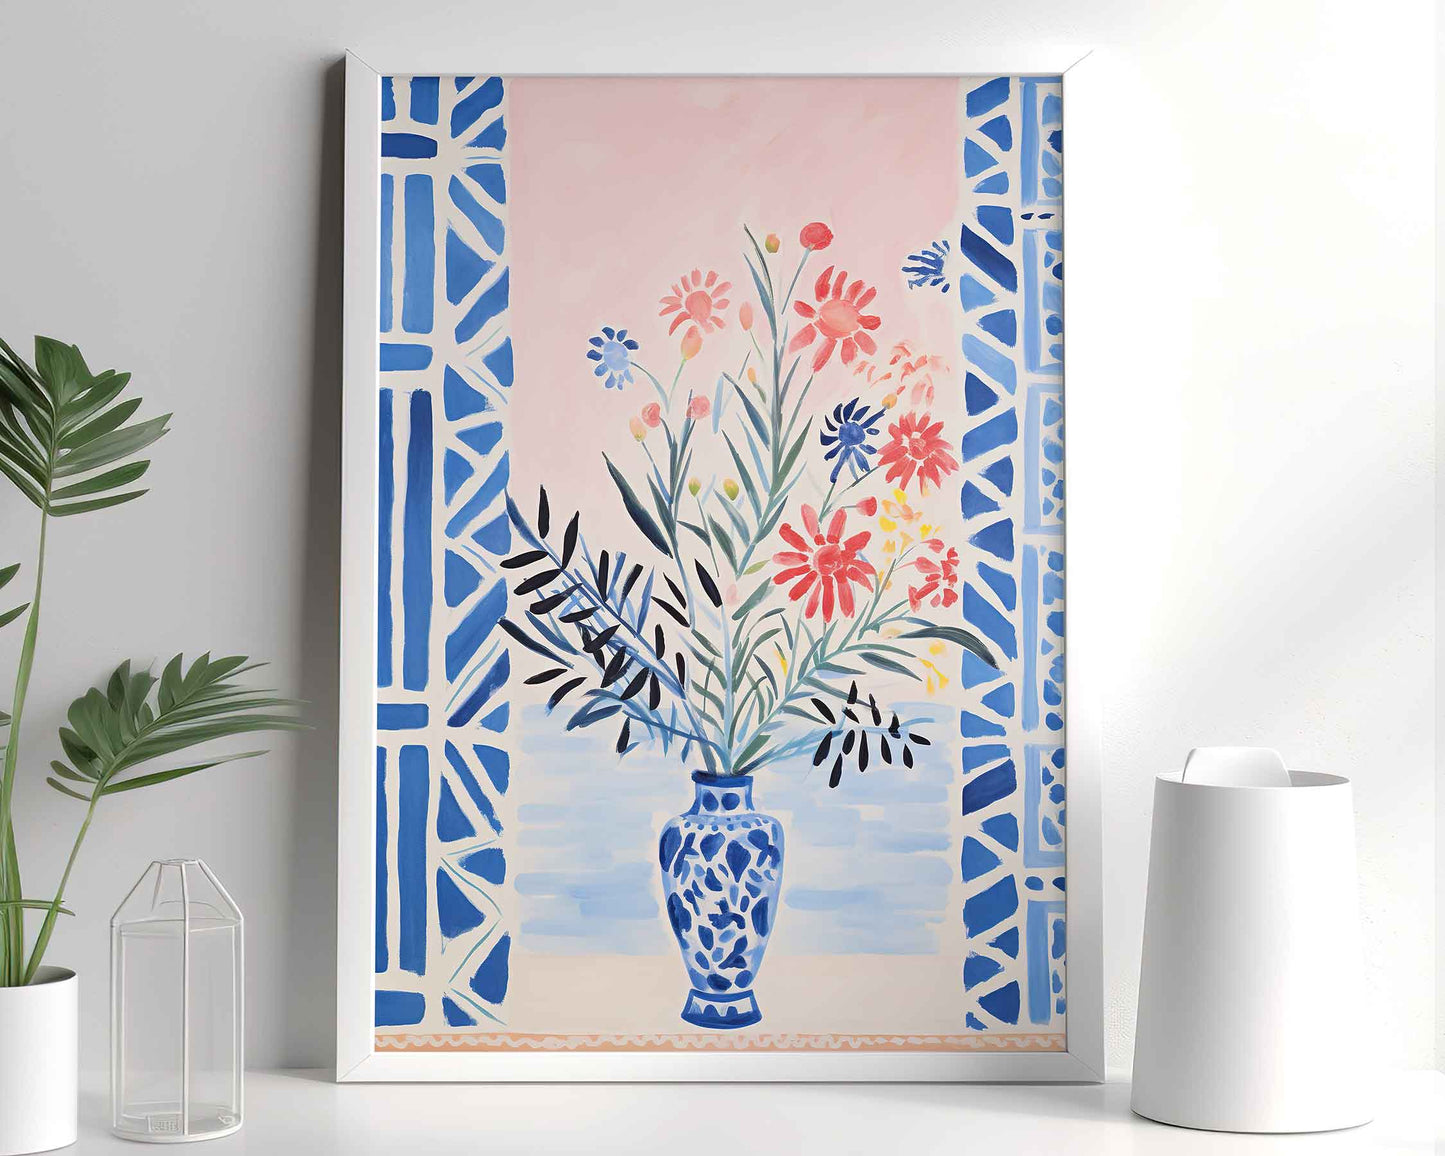 Framed Image of Matisse Style Poster Print Art Wall Oil Paintings Blue Theme